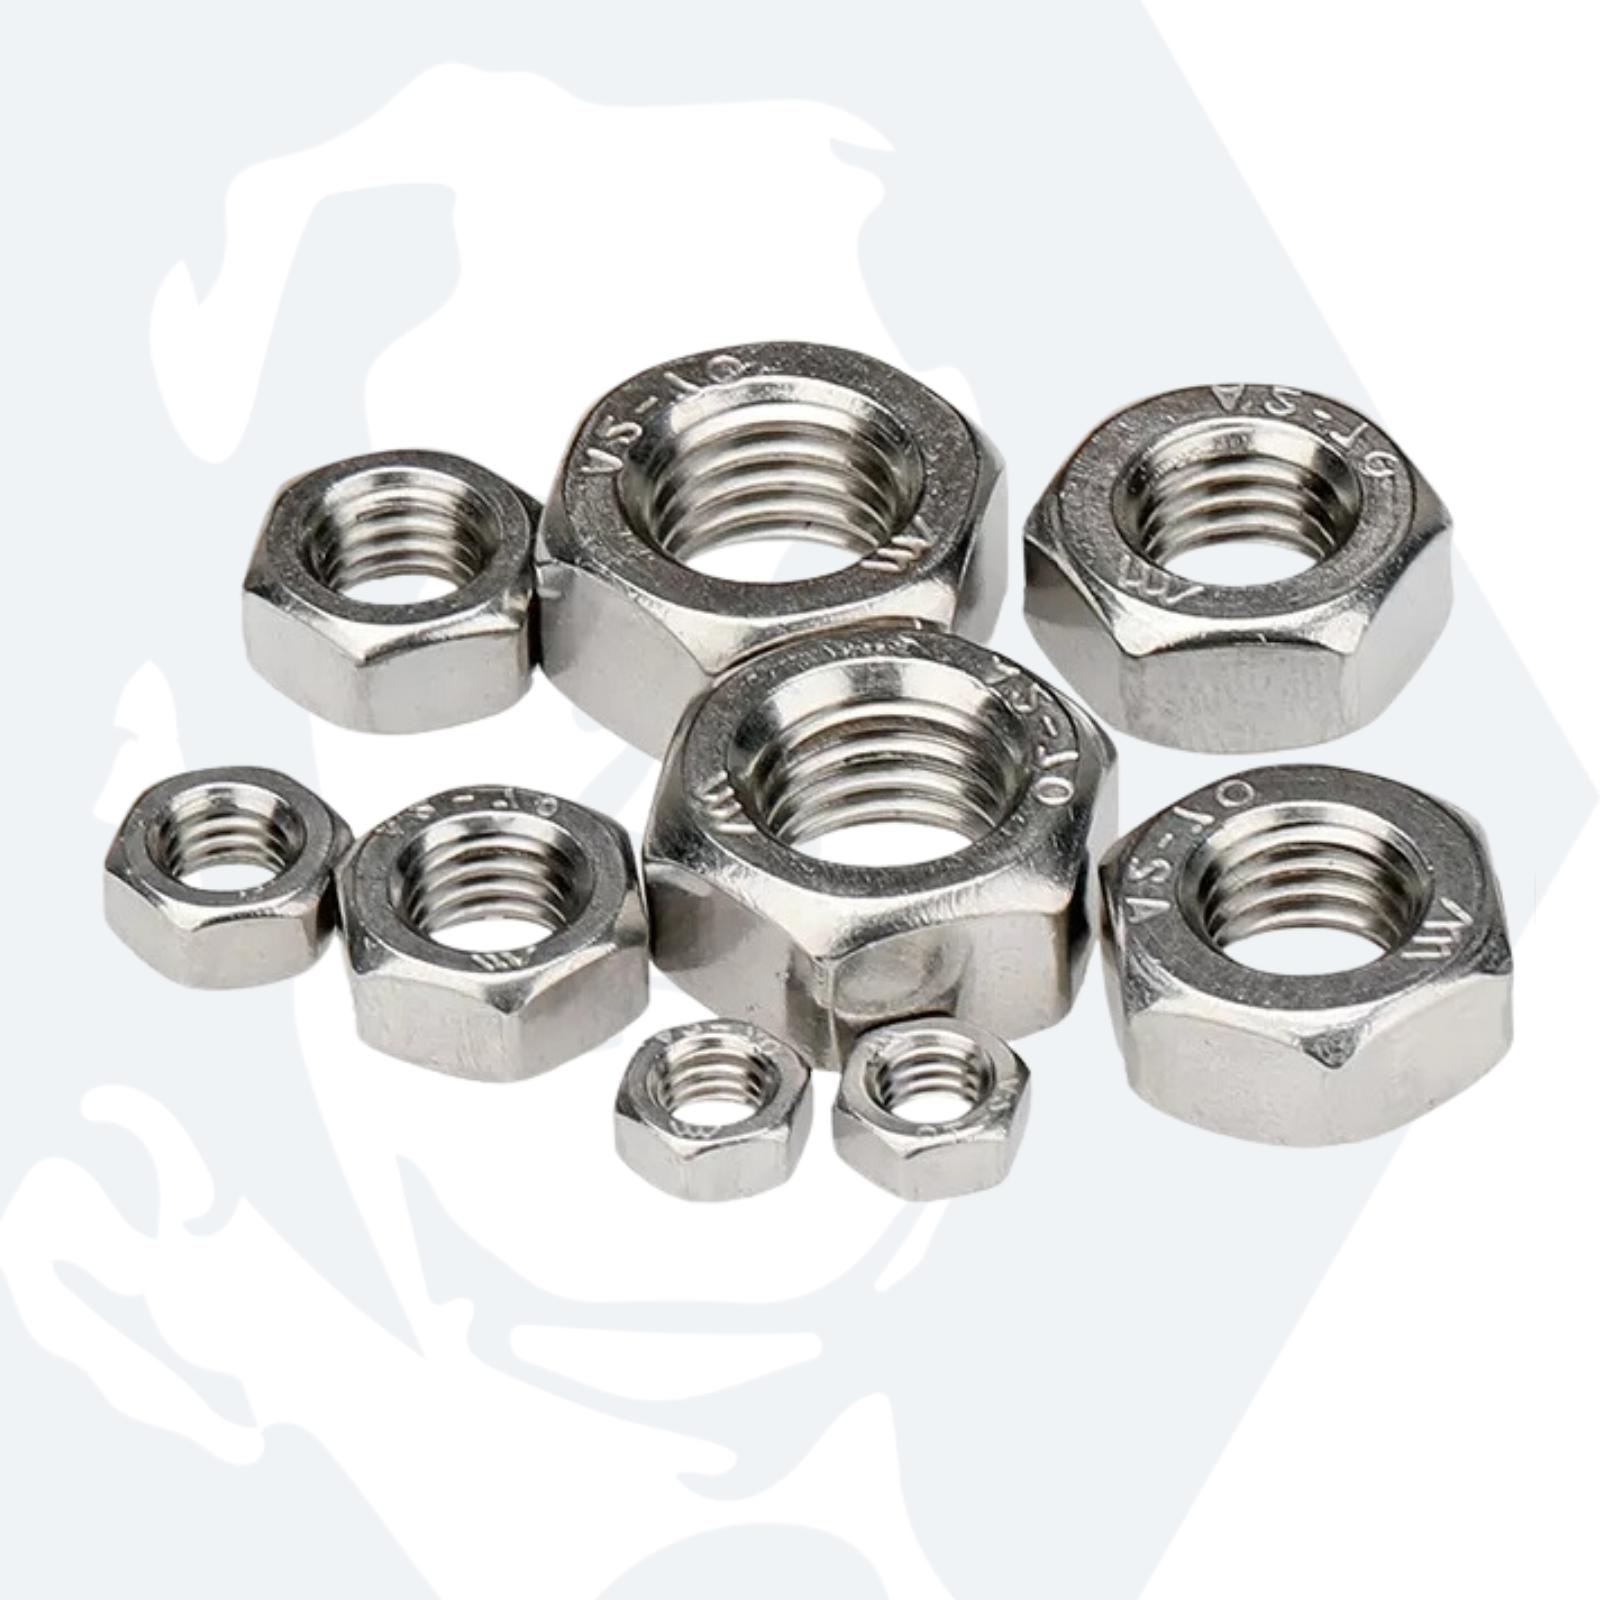 M12 Hexagon Nuts (DIN 934) - Stainless Steel (A4)